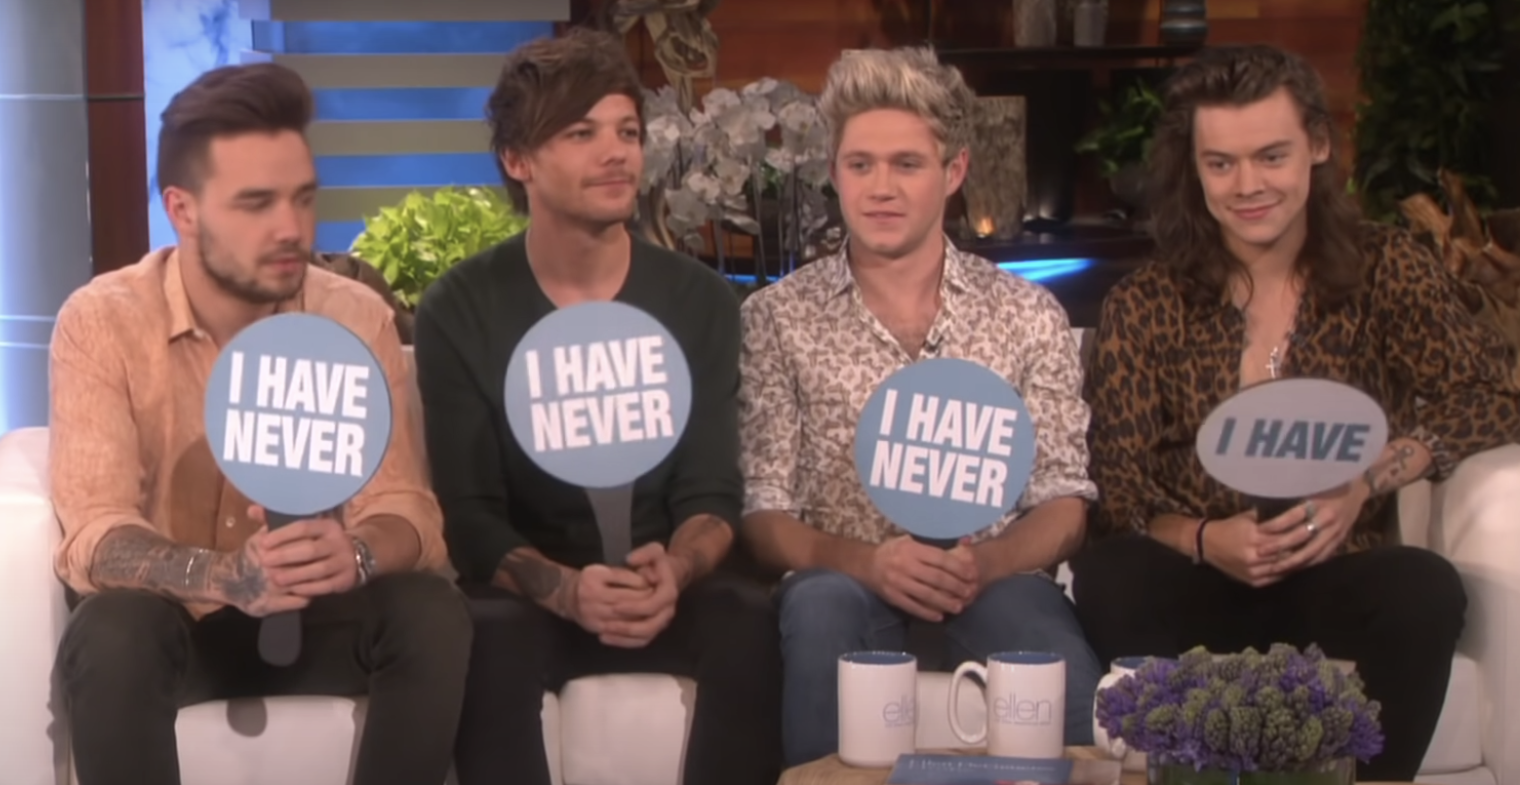 The members of One Direction hold signs to indicate their answers; Harry&#x27;s says &quot;I have&quot; while all the other say &quot;I have never&quot;